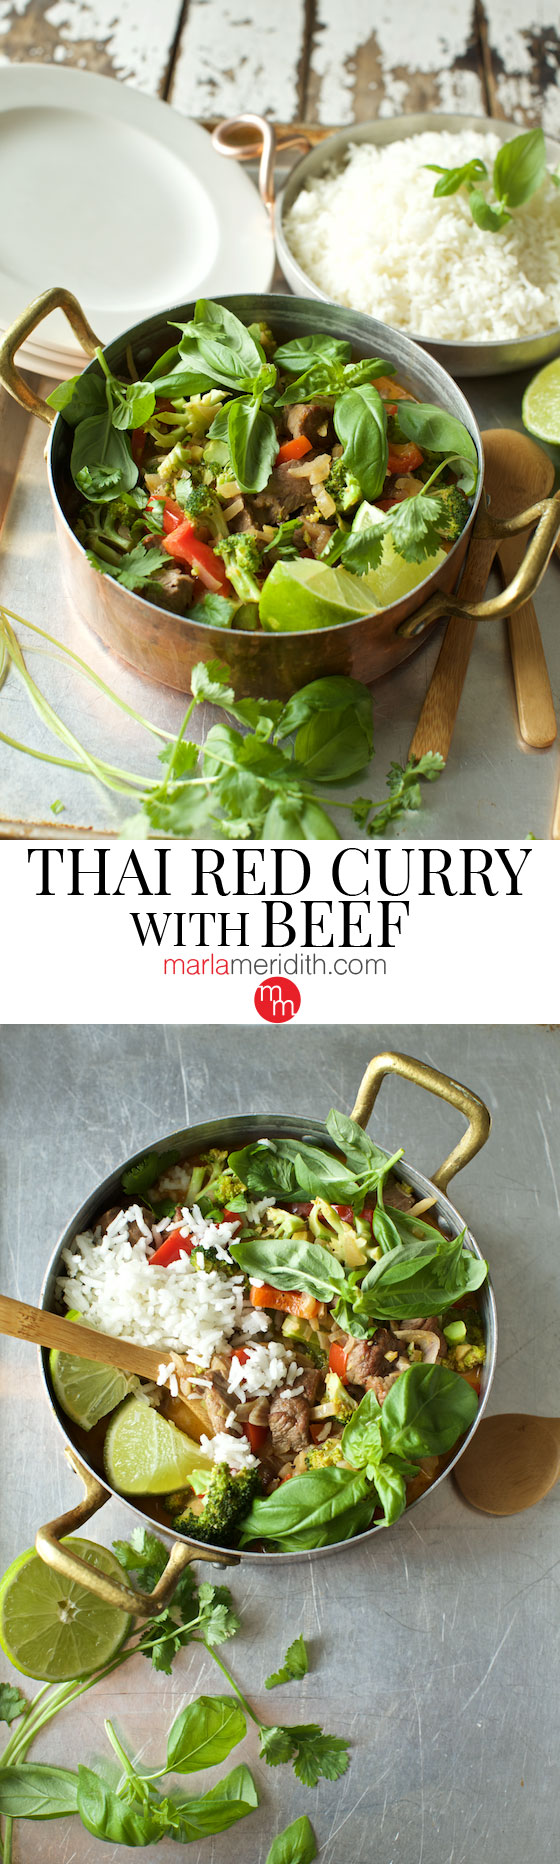 Thai Red Curry with Beef | MarlaMeridith.com ( @marlameridith ) #recipe